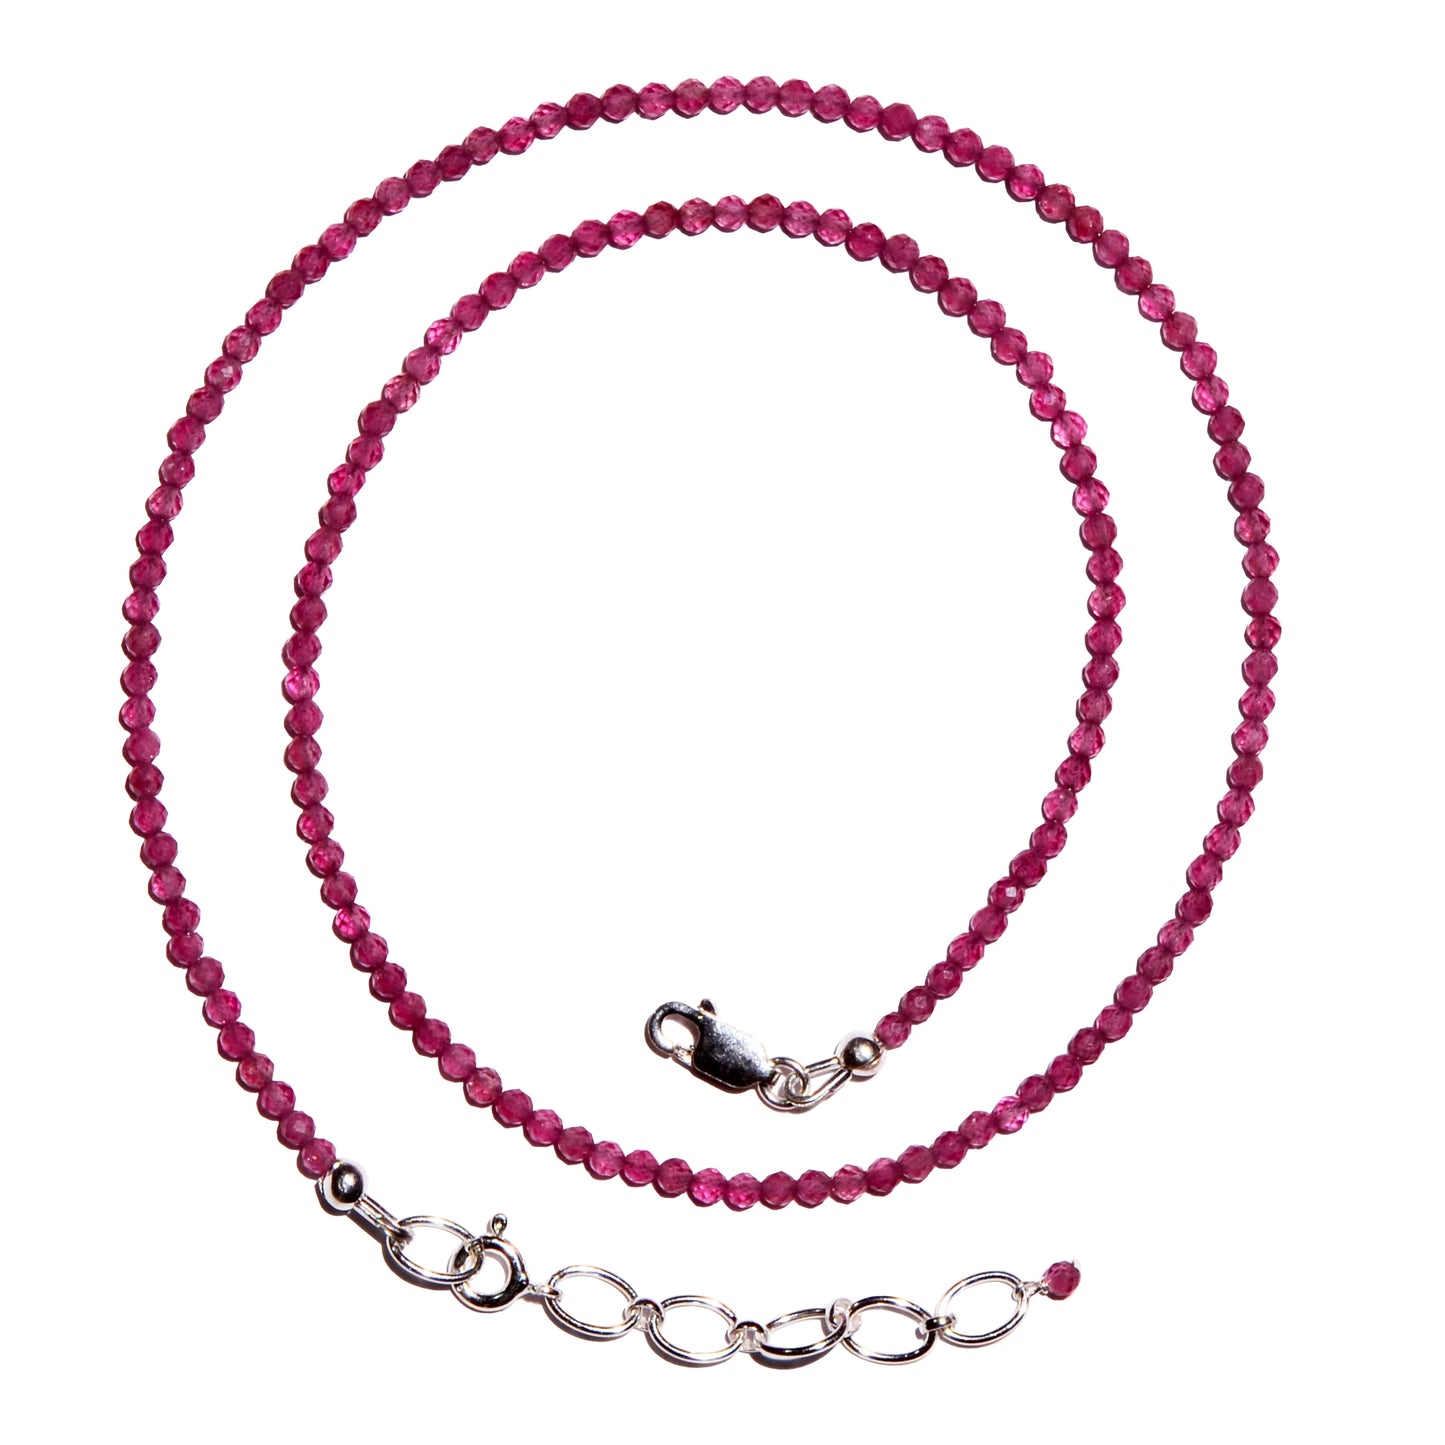 Buy Pink Tourmaline Faceted Microbead Necklace 2.5mm for loving wisdom.